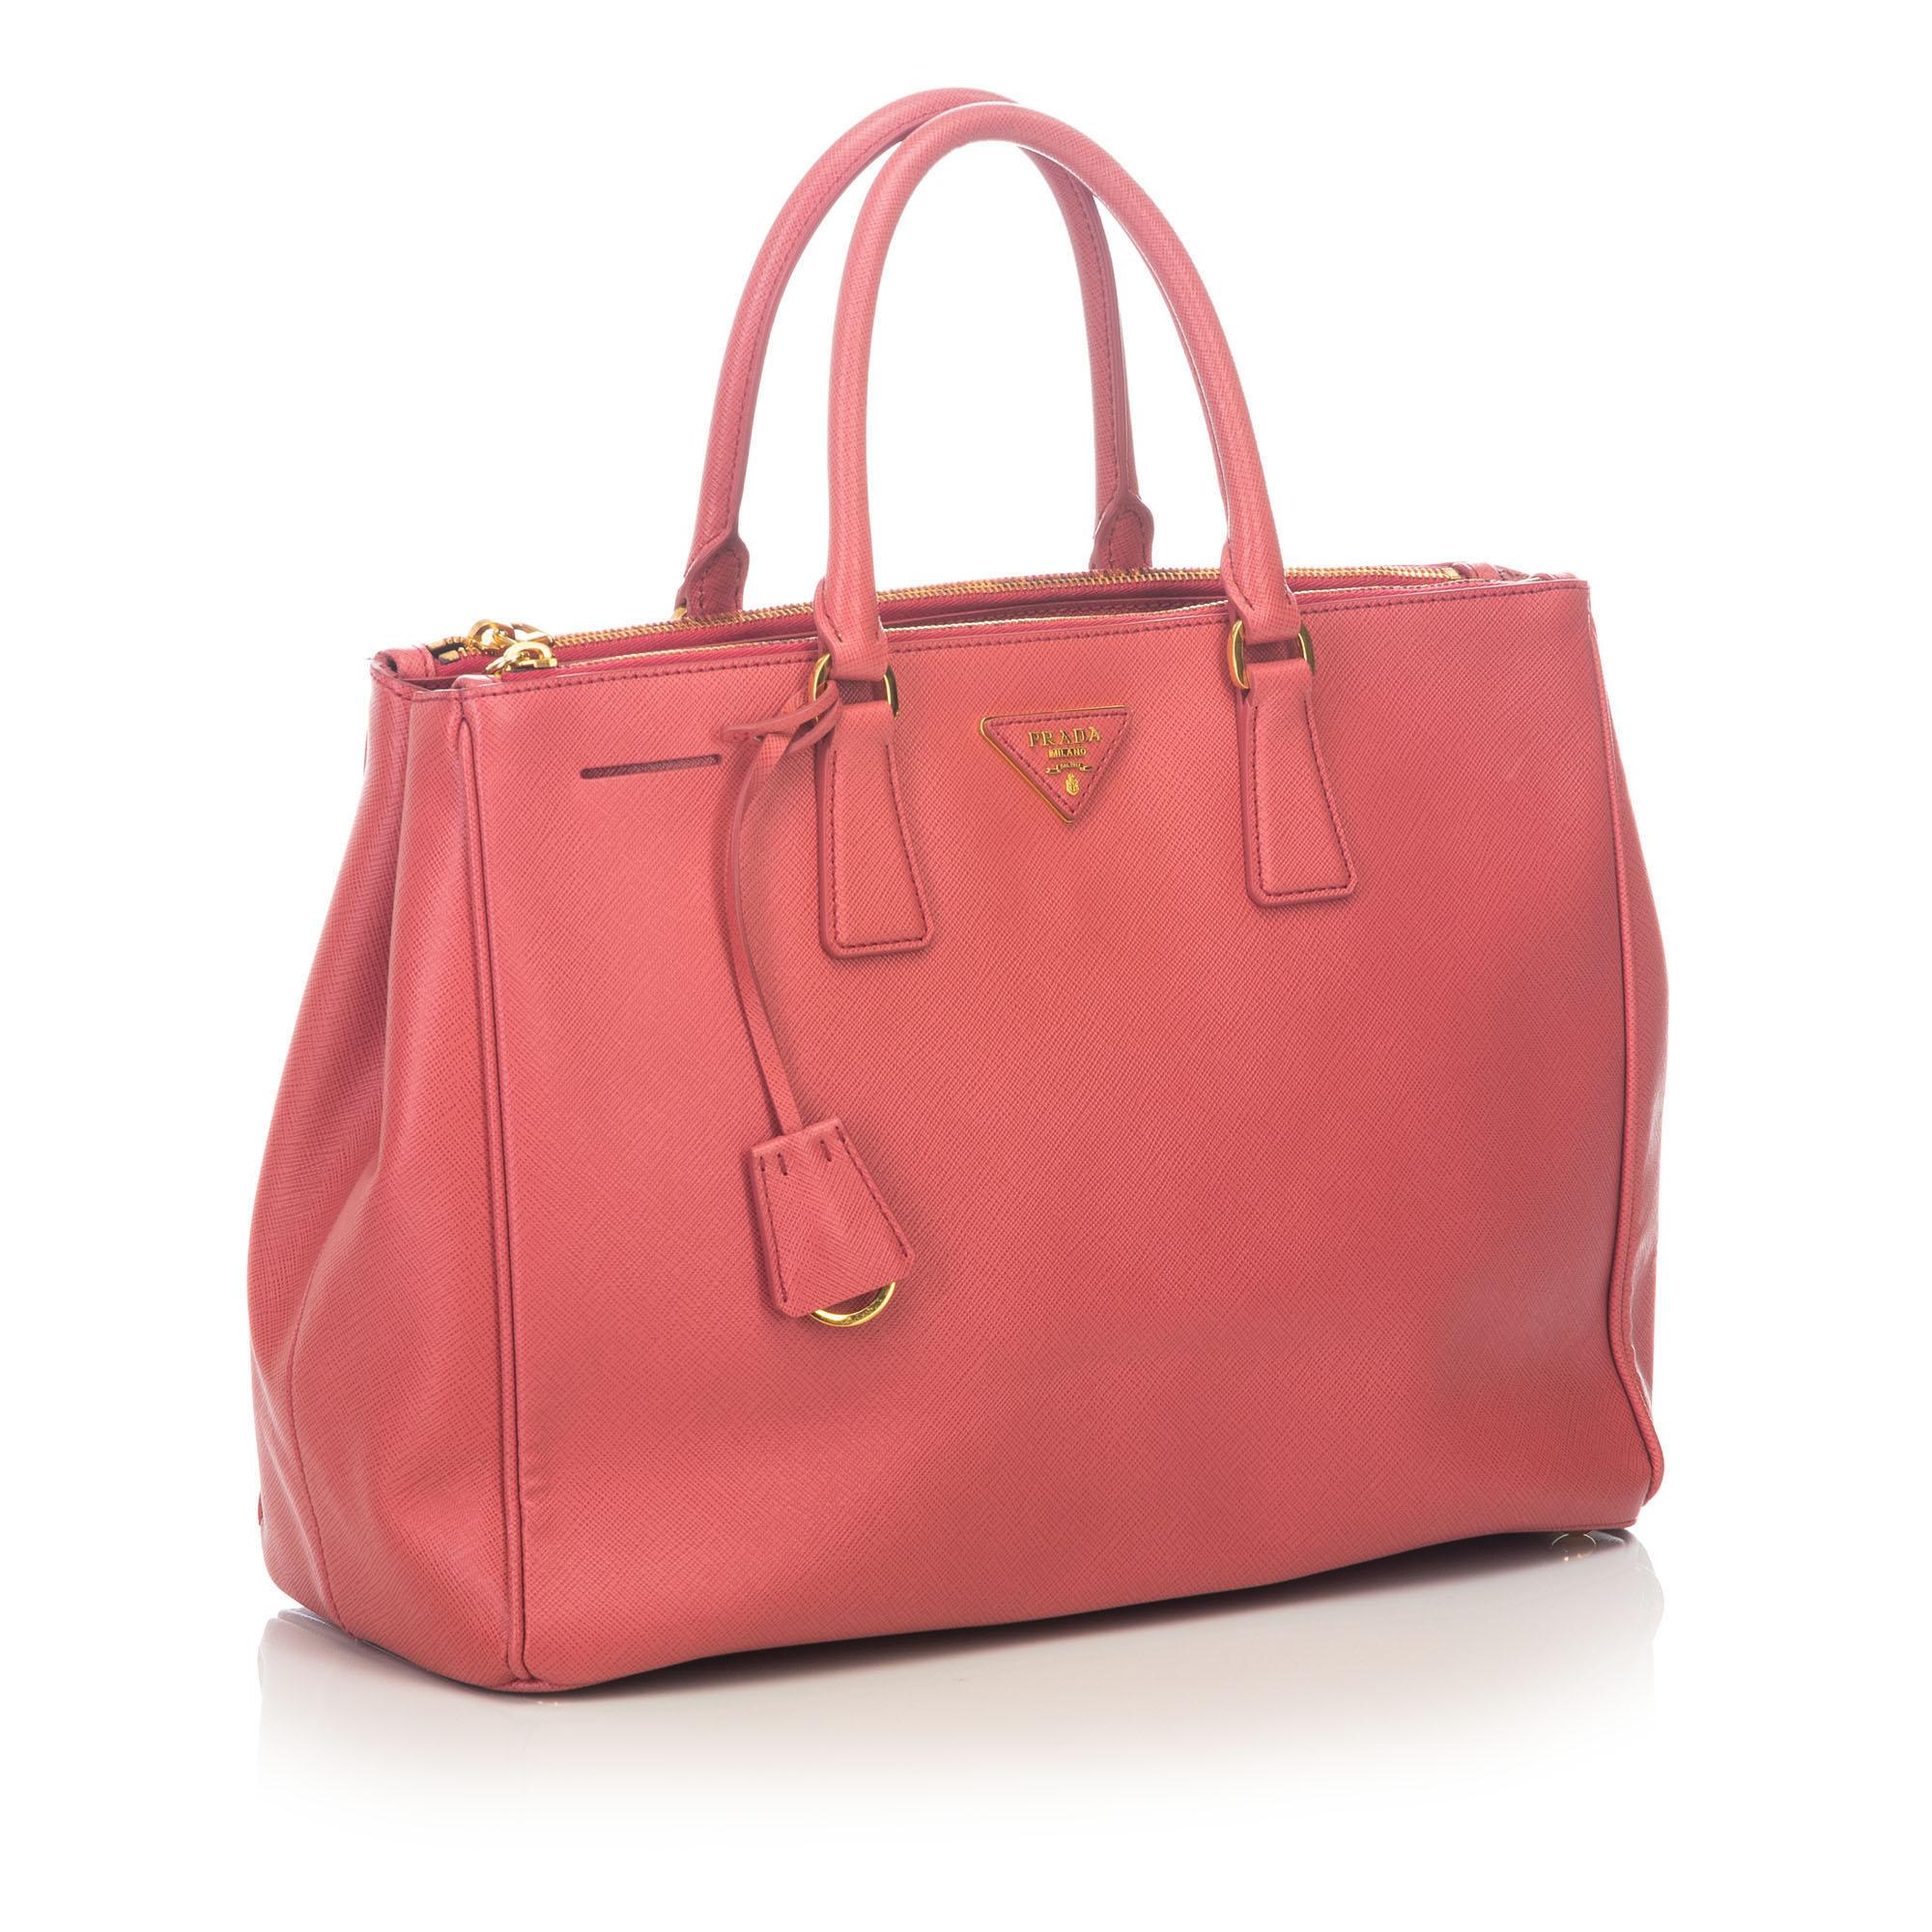 This tote features a saffiano leather body, rolled handles, zip compartments, an open top, and an interior zip pocket. It carries as AB condition rating.

Inclusions: 
This item does not come with inclusions.

Dimensions:
Length: 25.50 cm
Width: